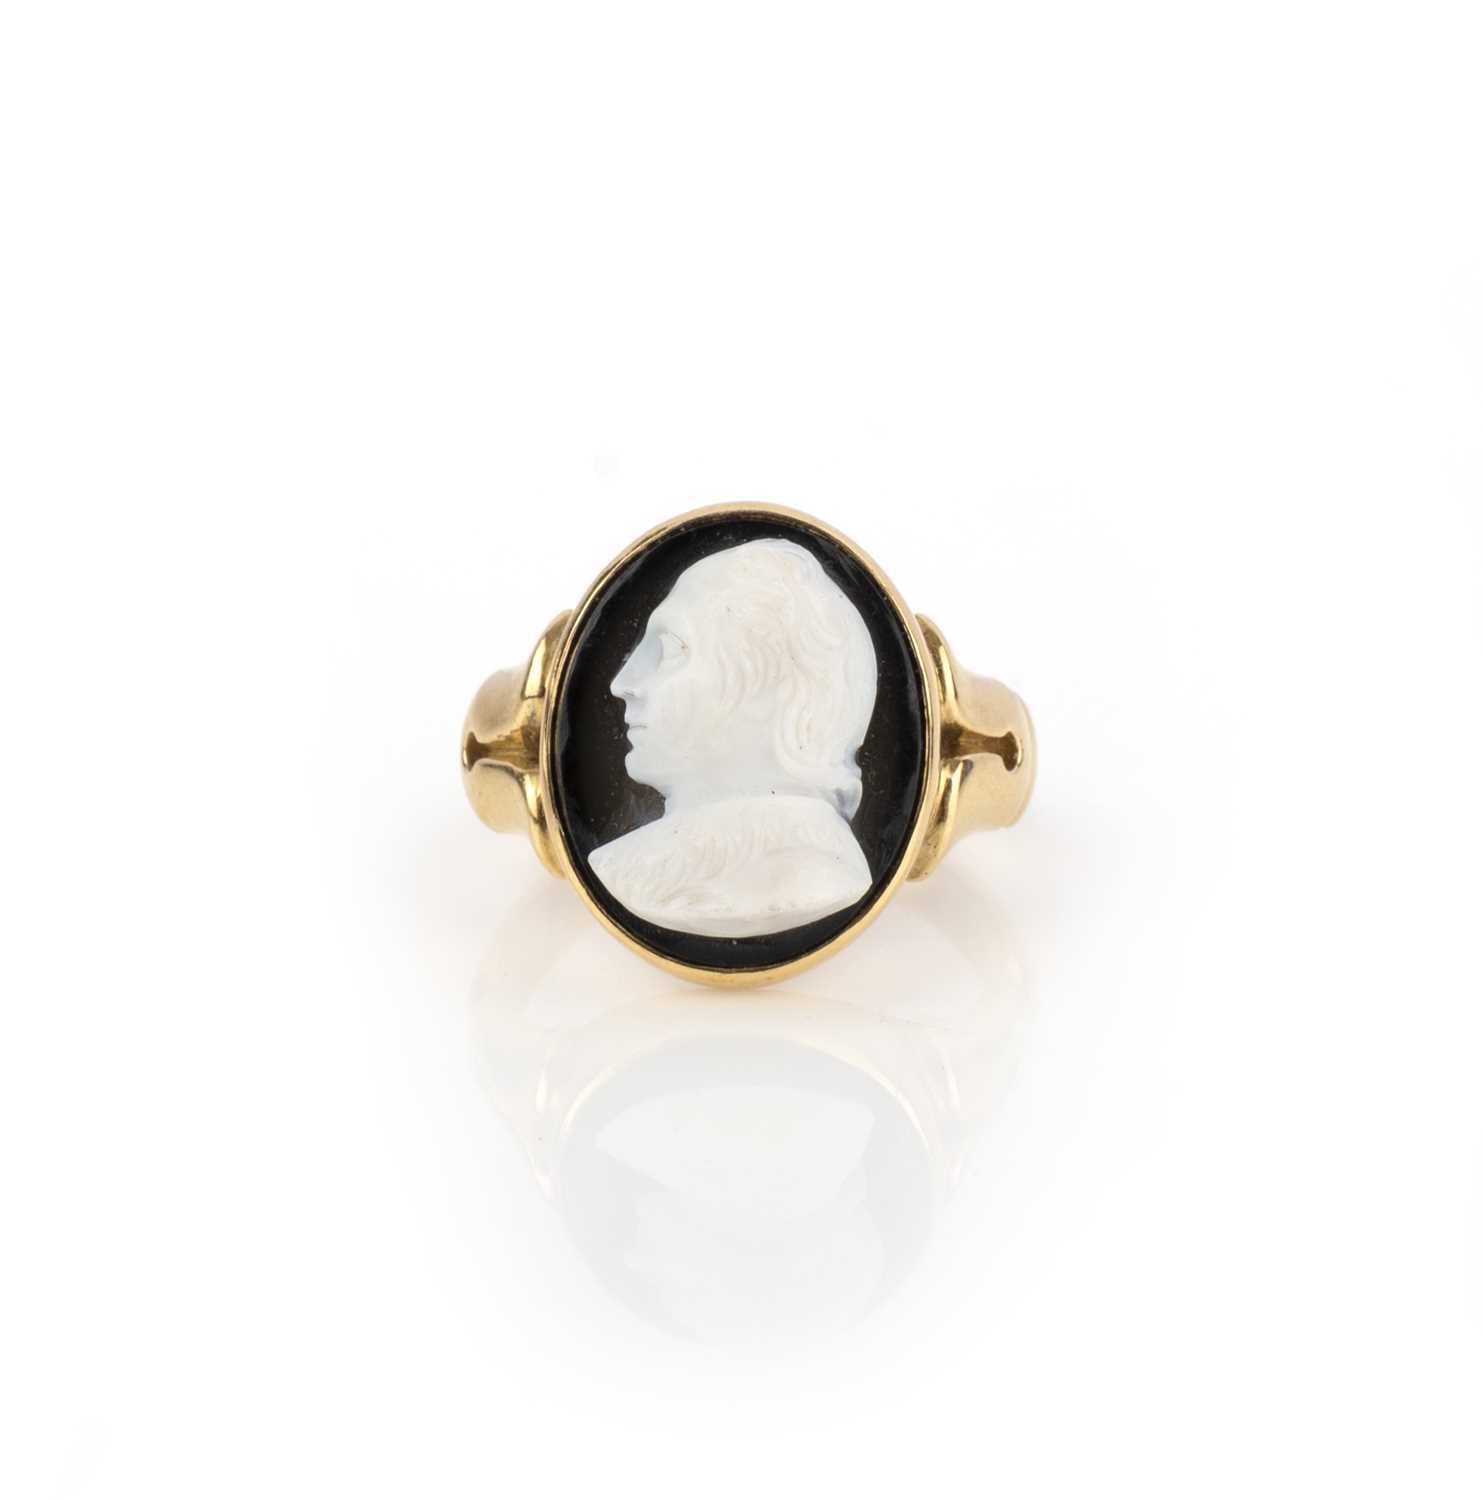 An onyx cameo ring, circa 1881, set with an oval onyx cameo depicting the philosopher John Locke (